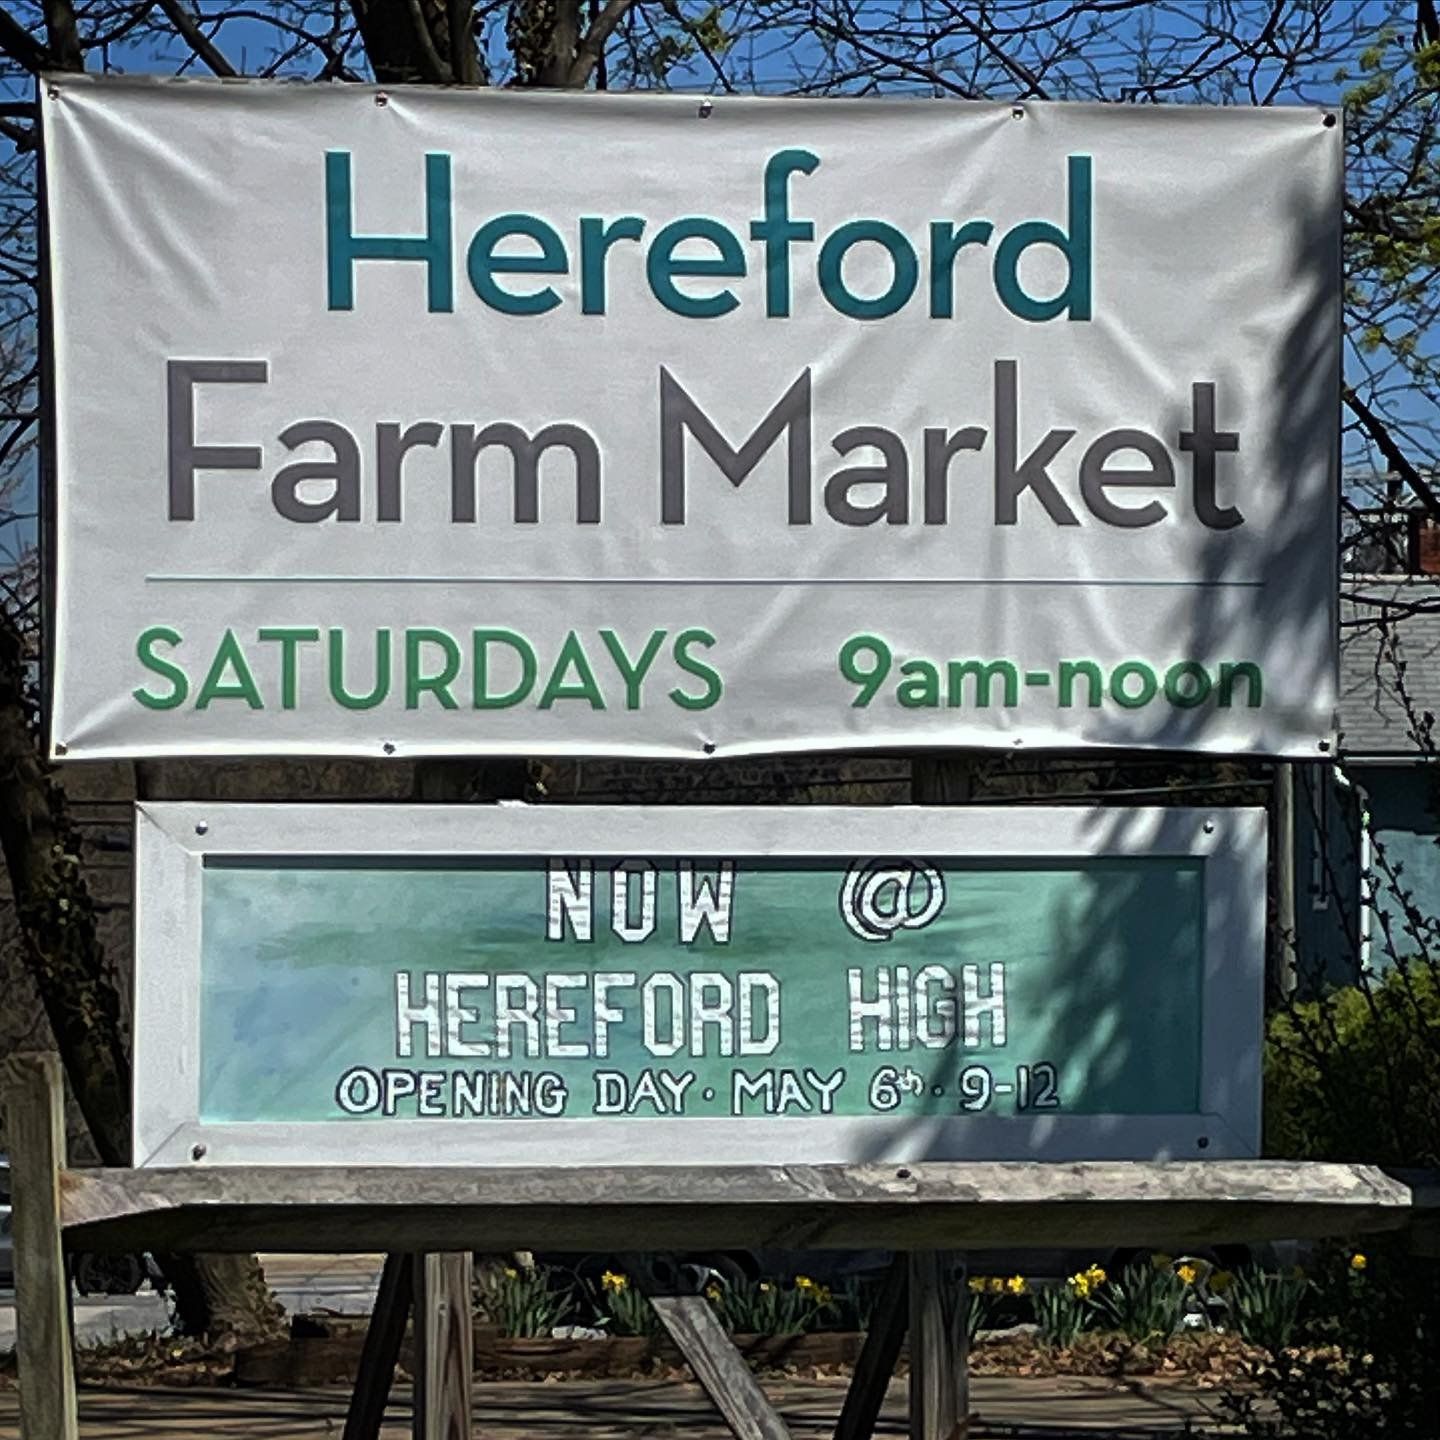 Next Happening: First Hereford Farmers Market and Spring Share #5!